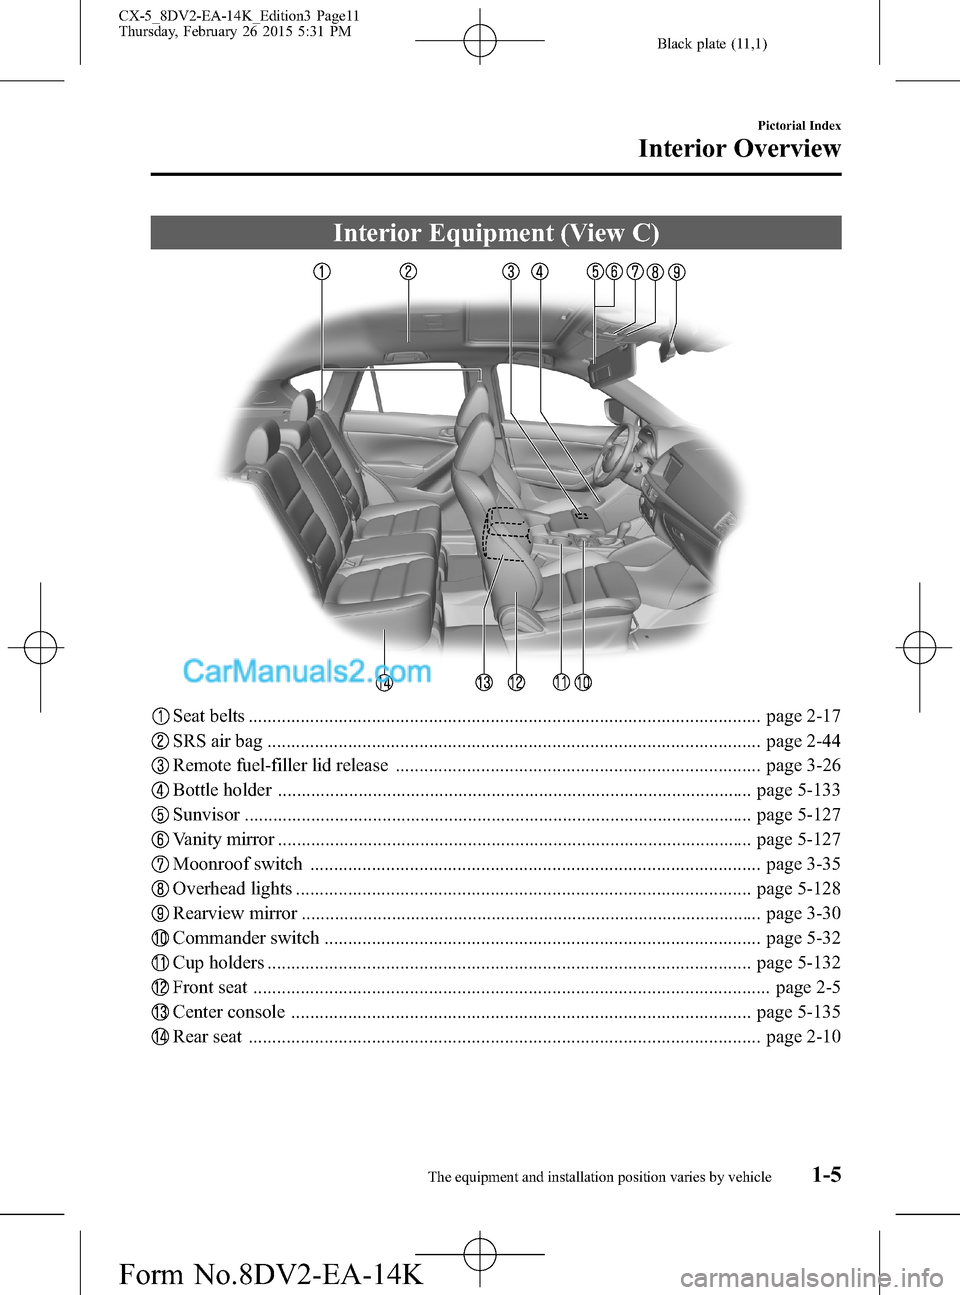 MAZDA MODEL CX-5 2016  Owners Manual (in English) Black plate (11,1)
Interior Equipment (View C)
Seat belts ............................................................................................................ page 2-17
SRS air bag ...........